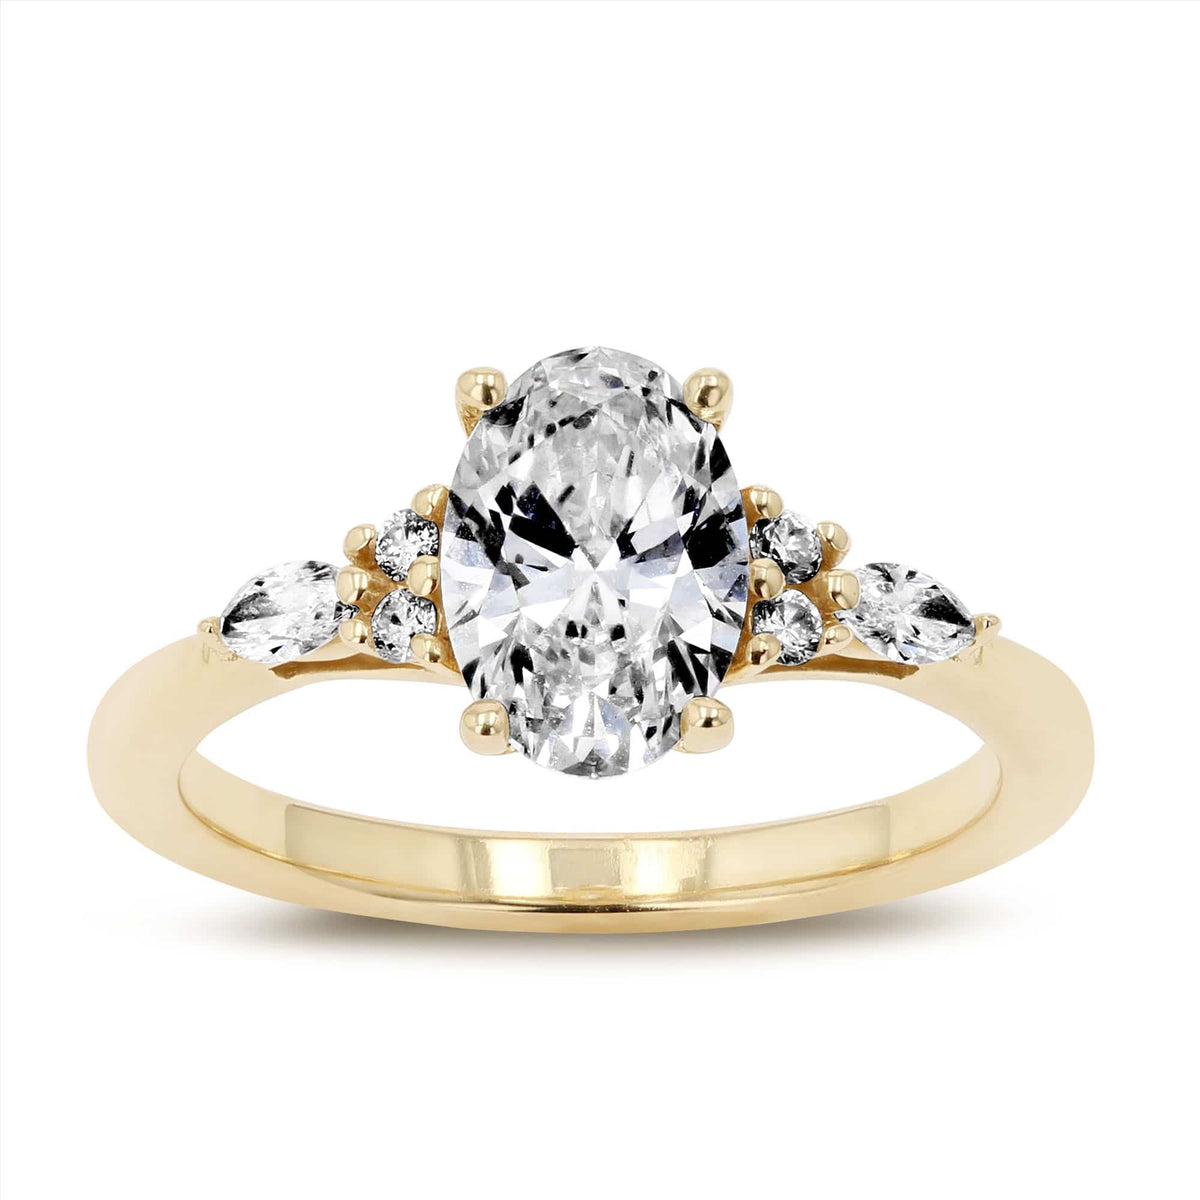 Shown with 1ct Oval Cut Lab Grown Diamond in 14K Yellow Gold